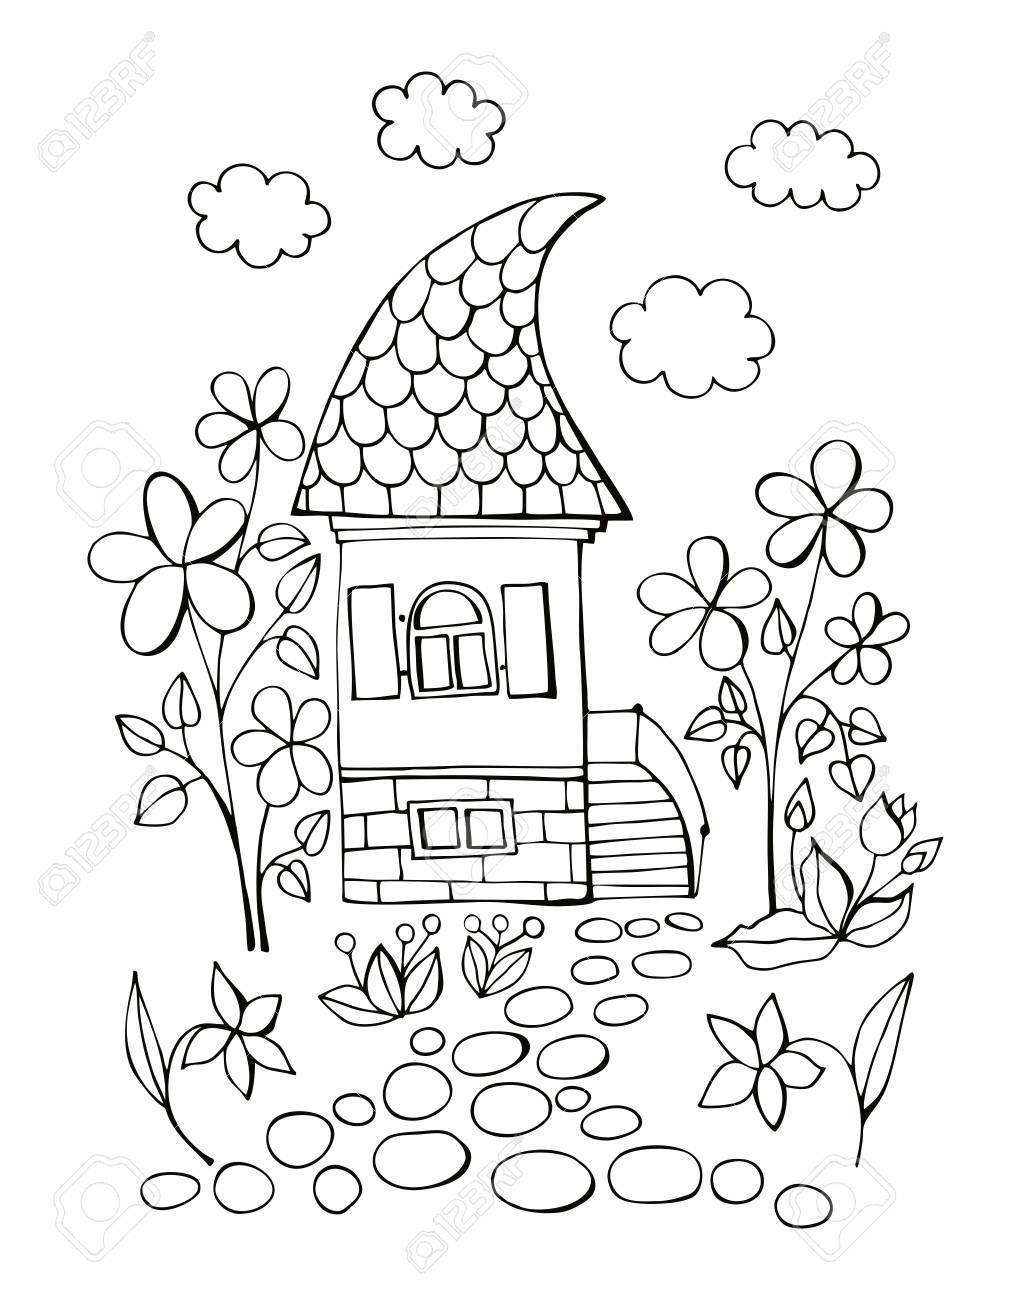 Summer day in fairy village coloring book with cute house and flowers black and white vector illustration royalty free svg cliparts vectors and stock illustration image